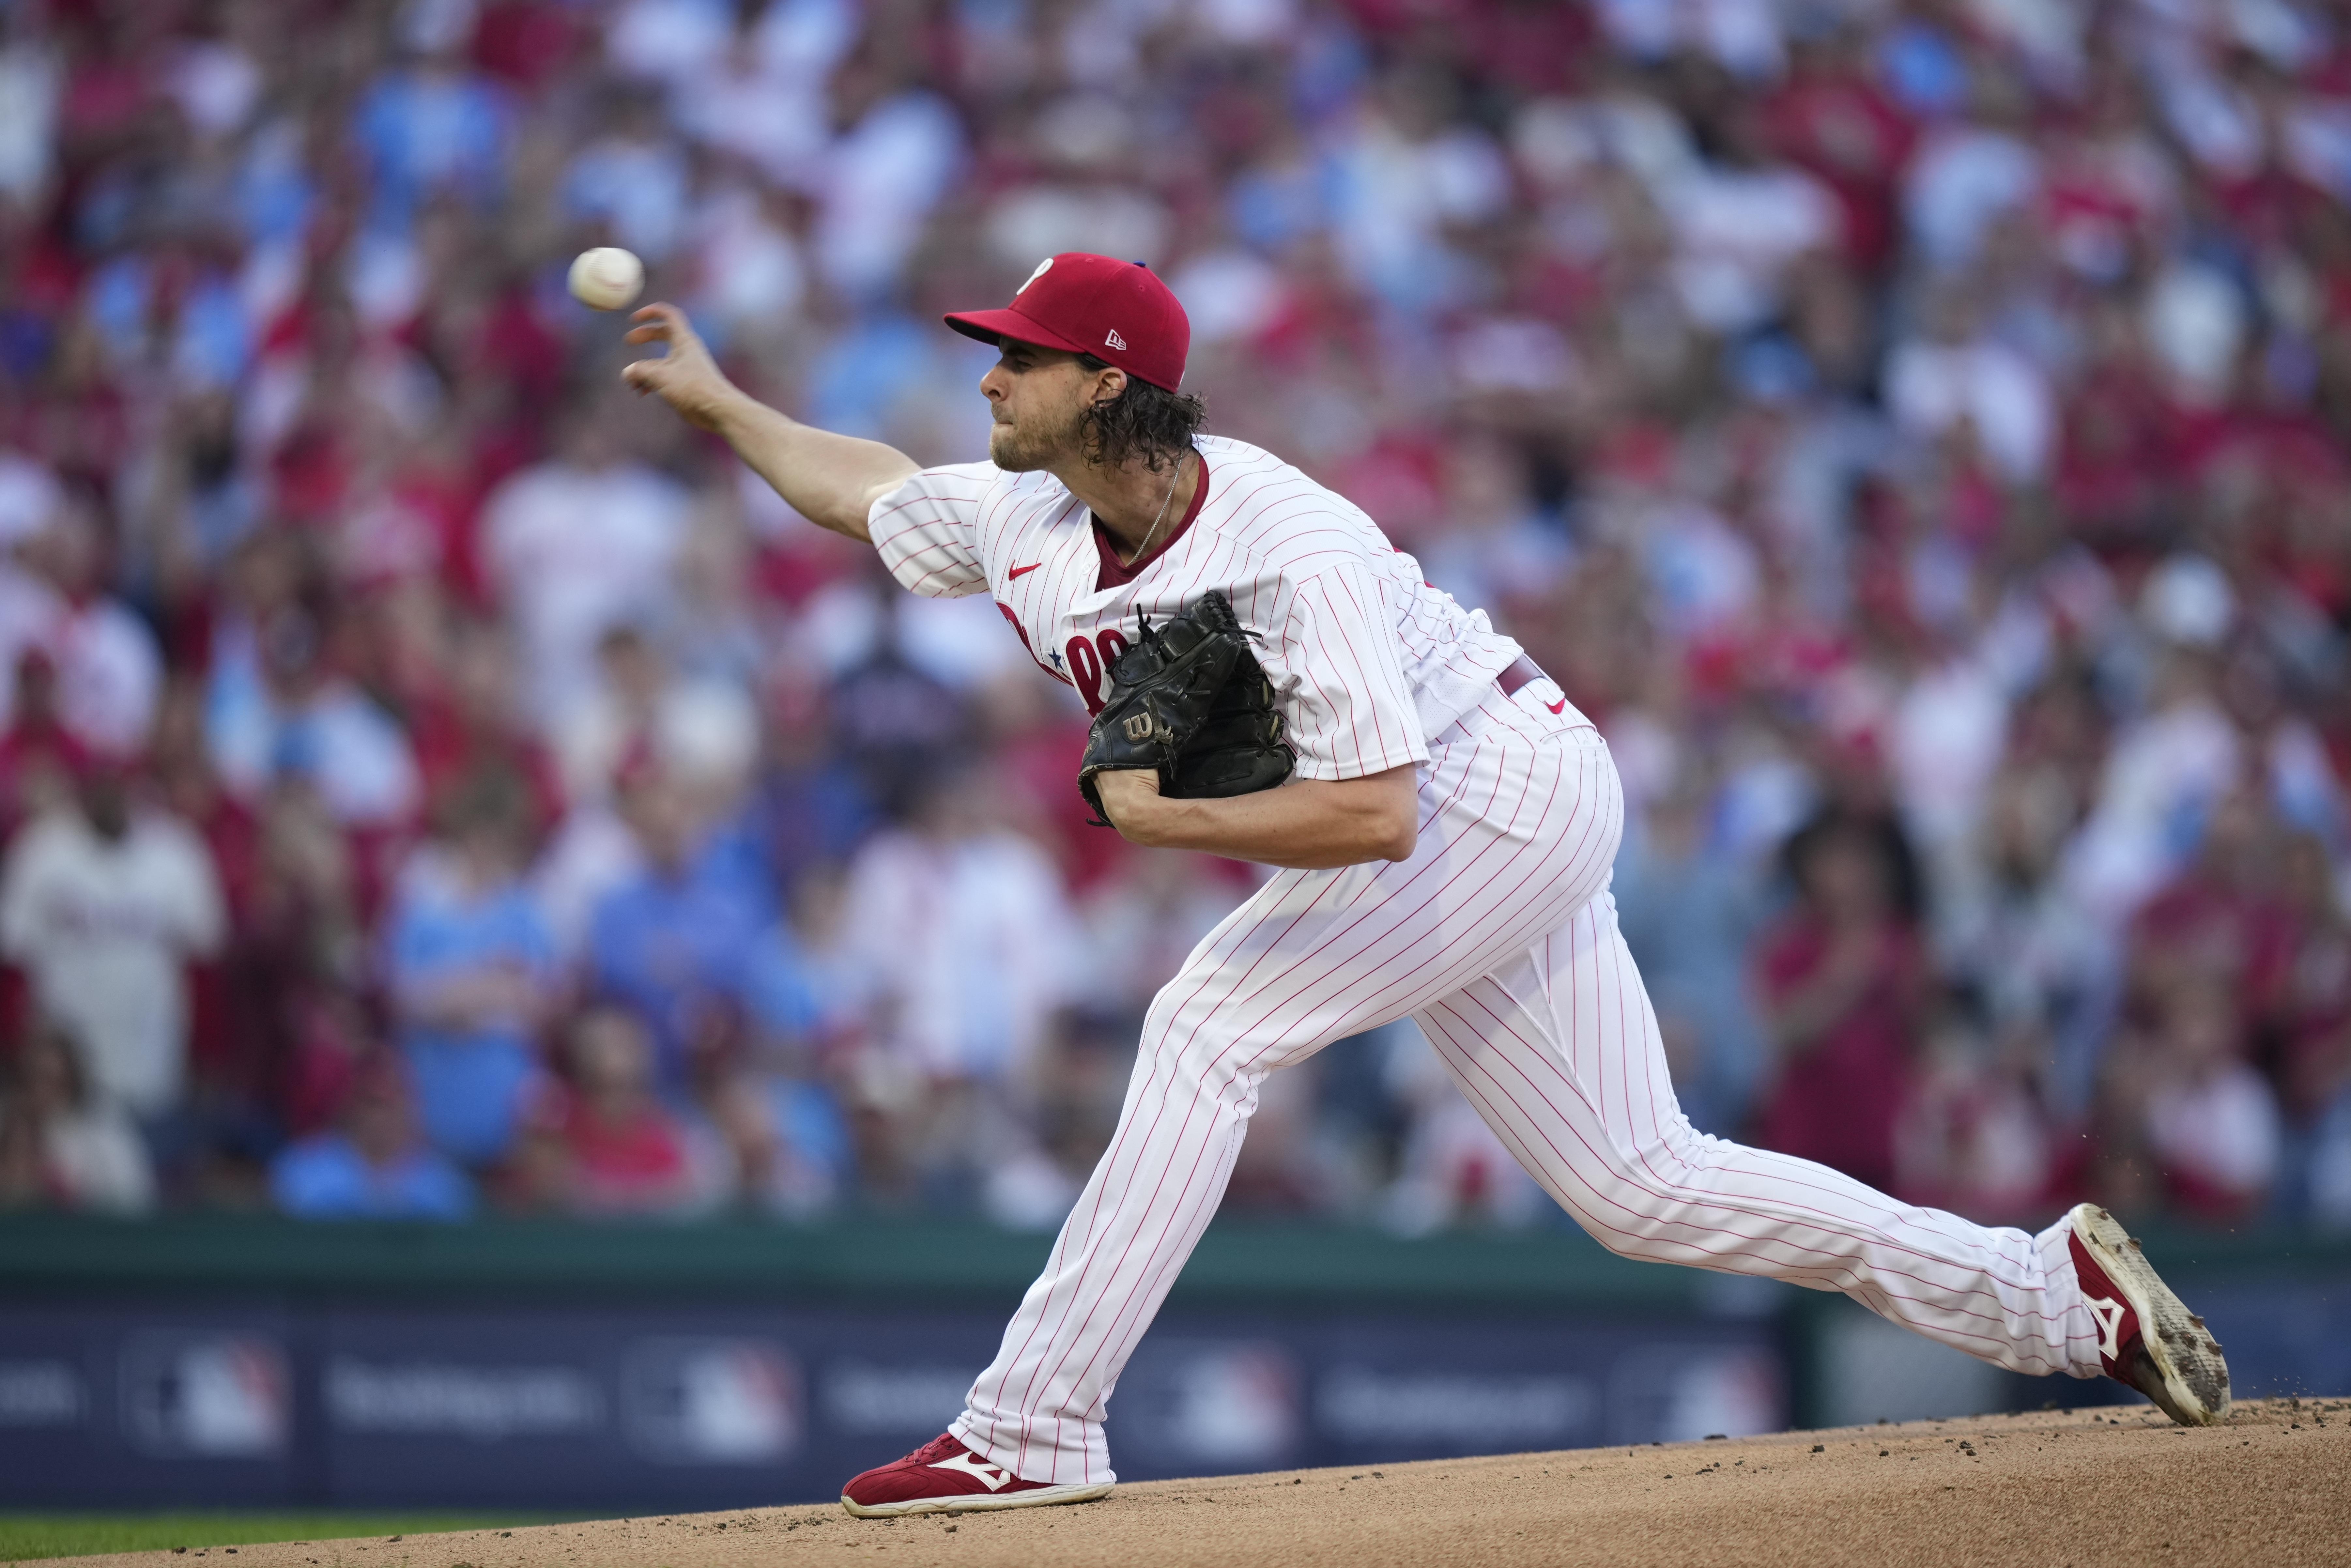 Phillies Zach Wheeler and wife announce baby No. 3 